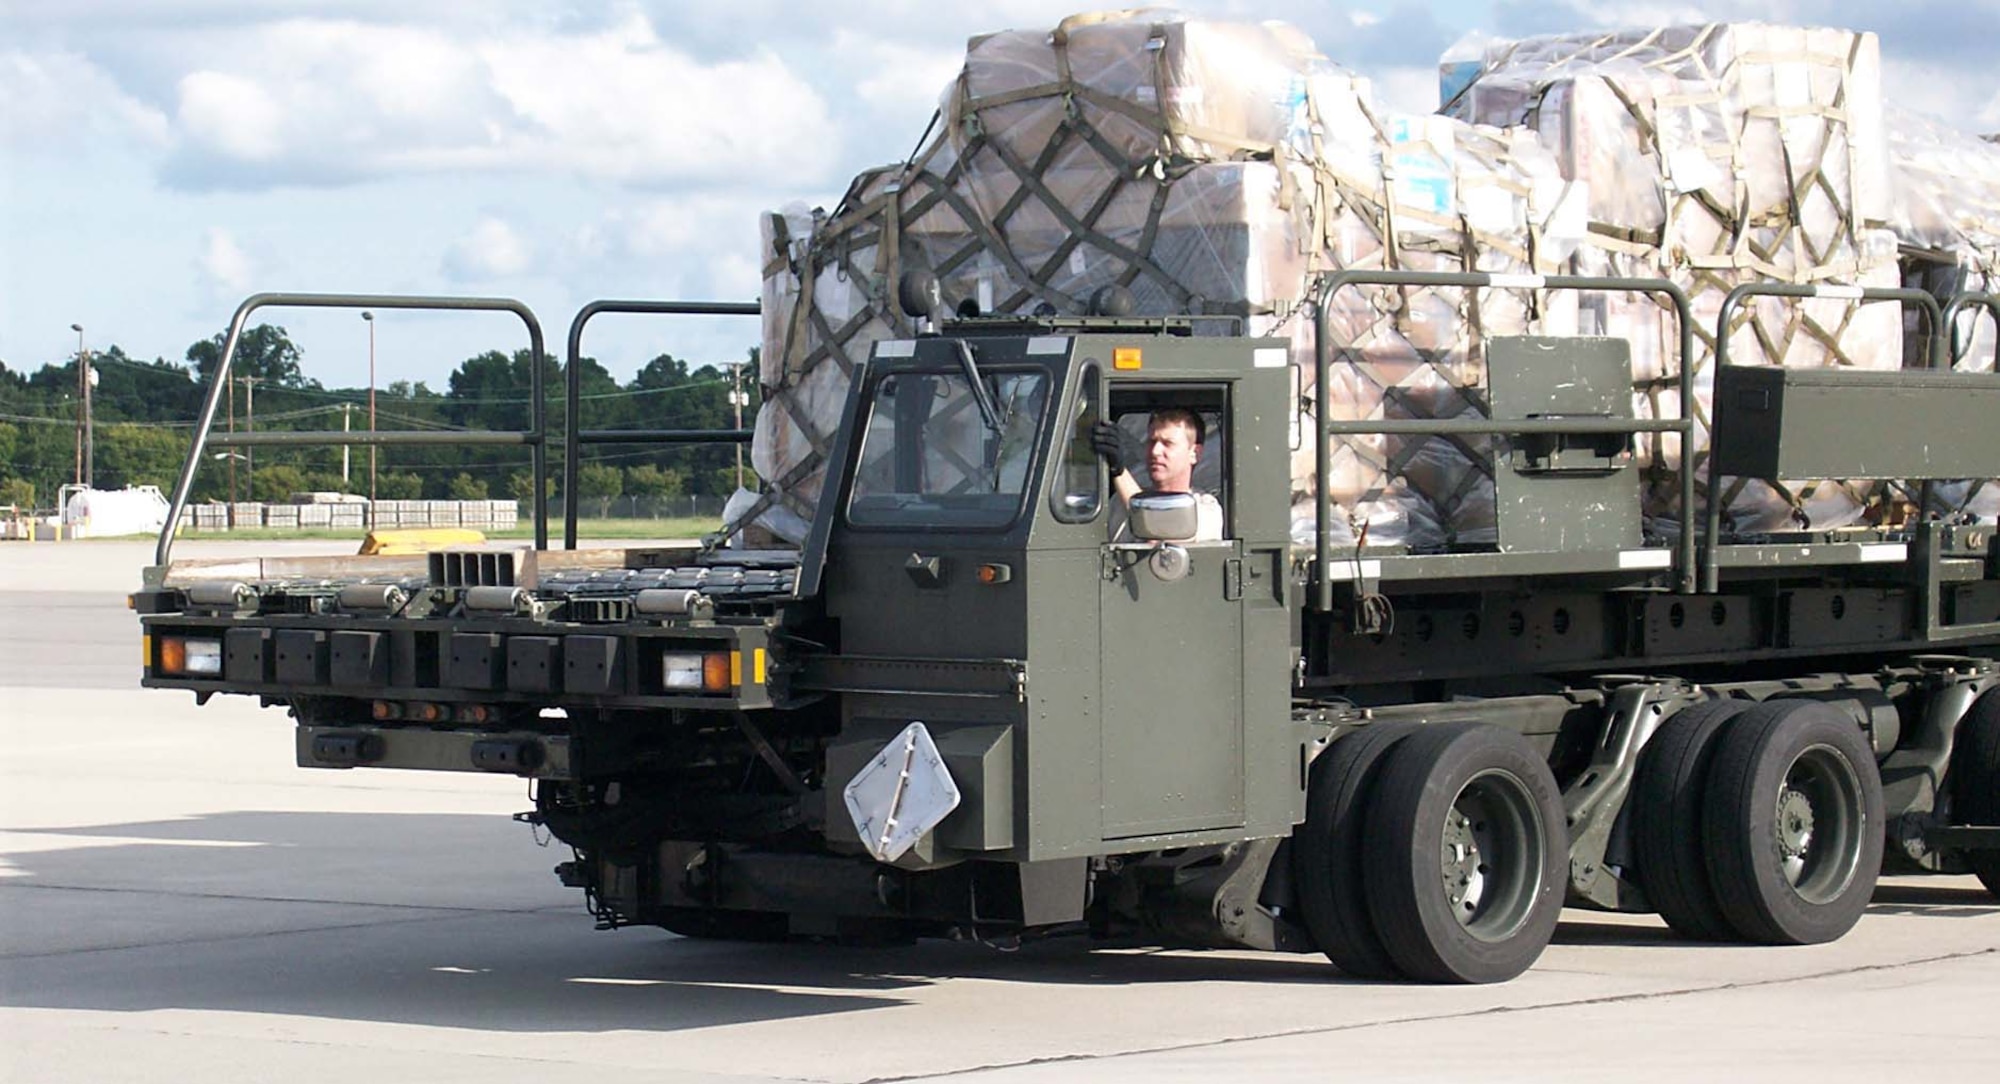 Tech. Sgt. Patrick Mills, 86th Aerial Port, McChord Air Force Base, Wash., prepares to load cargo onto an aircraft with a 60K Tunner New Generation Service Loader while on the readiness assessment team in Norfolk, Va., Aug. 22 to Sept. 4.  (U.S. Air Force photo/Staff Sgt. Mary Hall)